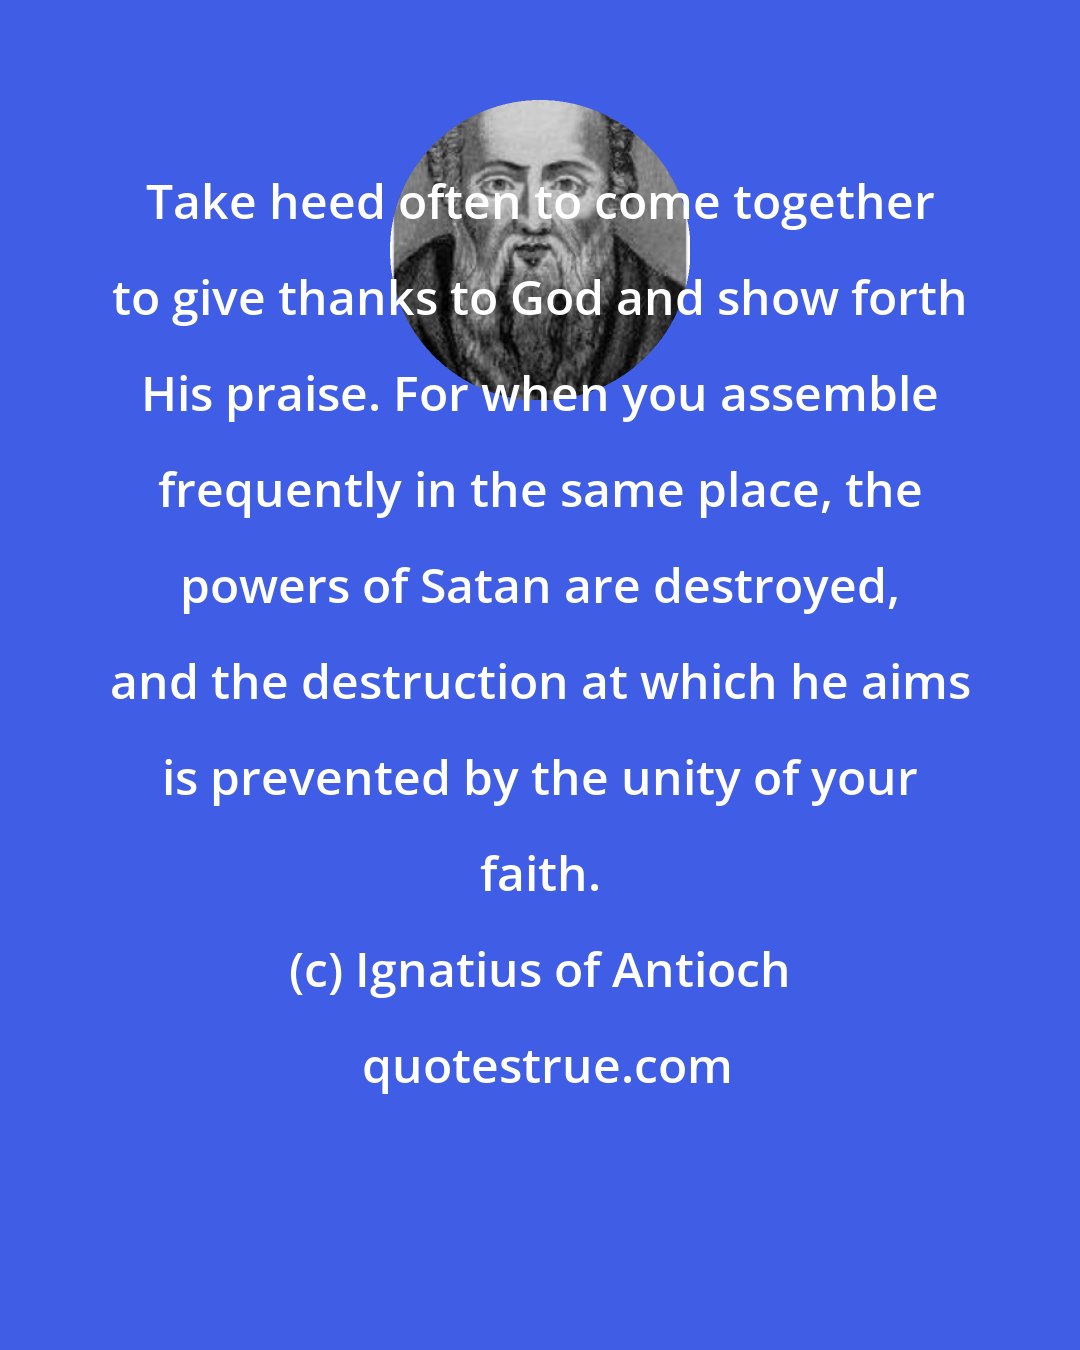 Ignatius of Antioch: Take heed often to come together to give thanks to God and show forth His praise. For when you assemble frequently in the same place, the powers of Satan are destroyed, and the destruction at which he aims is prevented by the unity of your faith.